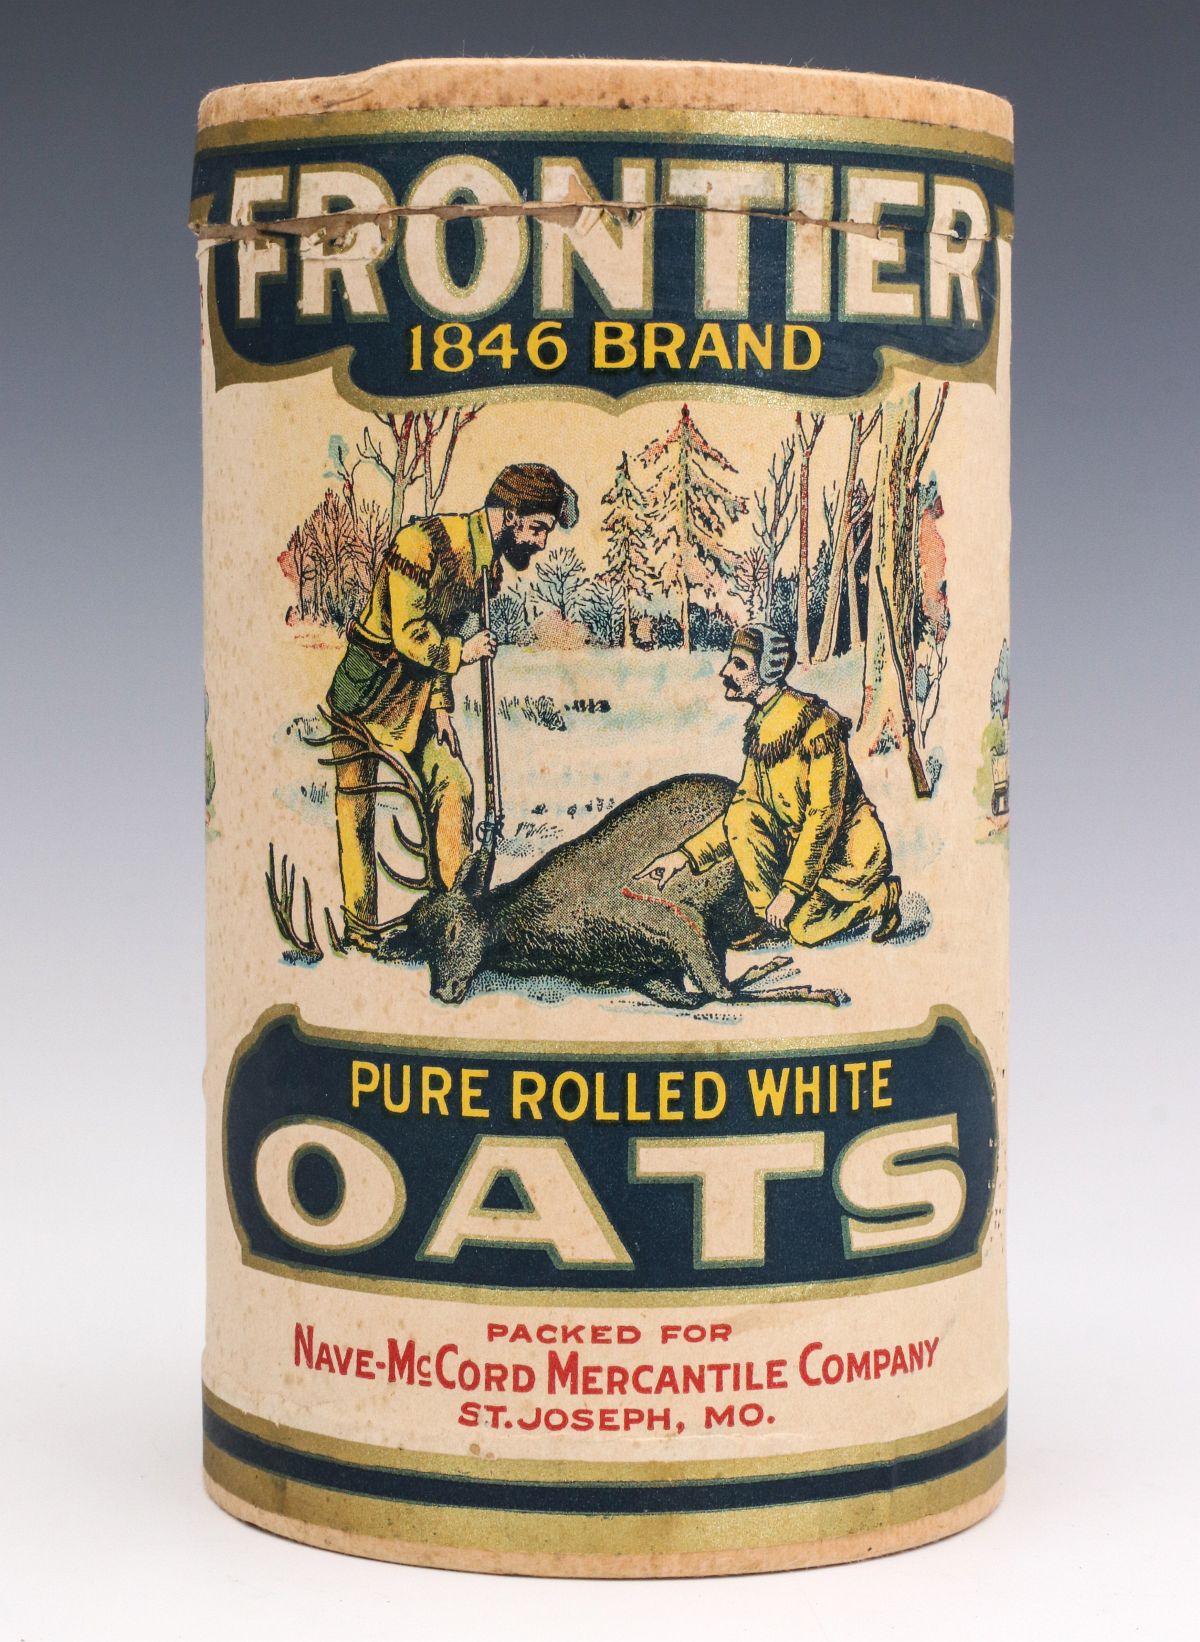 262: A FRONTIER 1846 BRAND ROLLED OATS CONTAINER C 1910